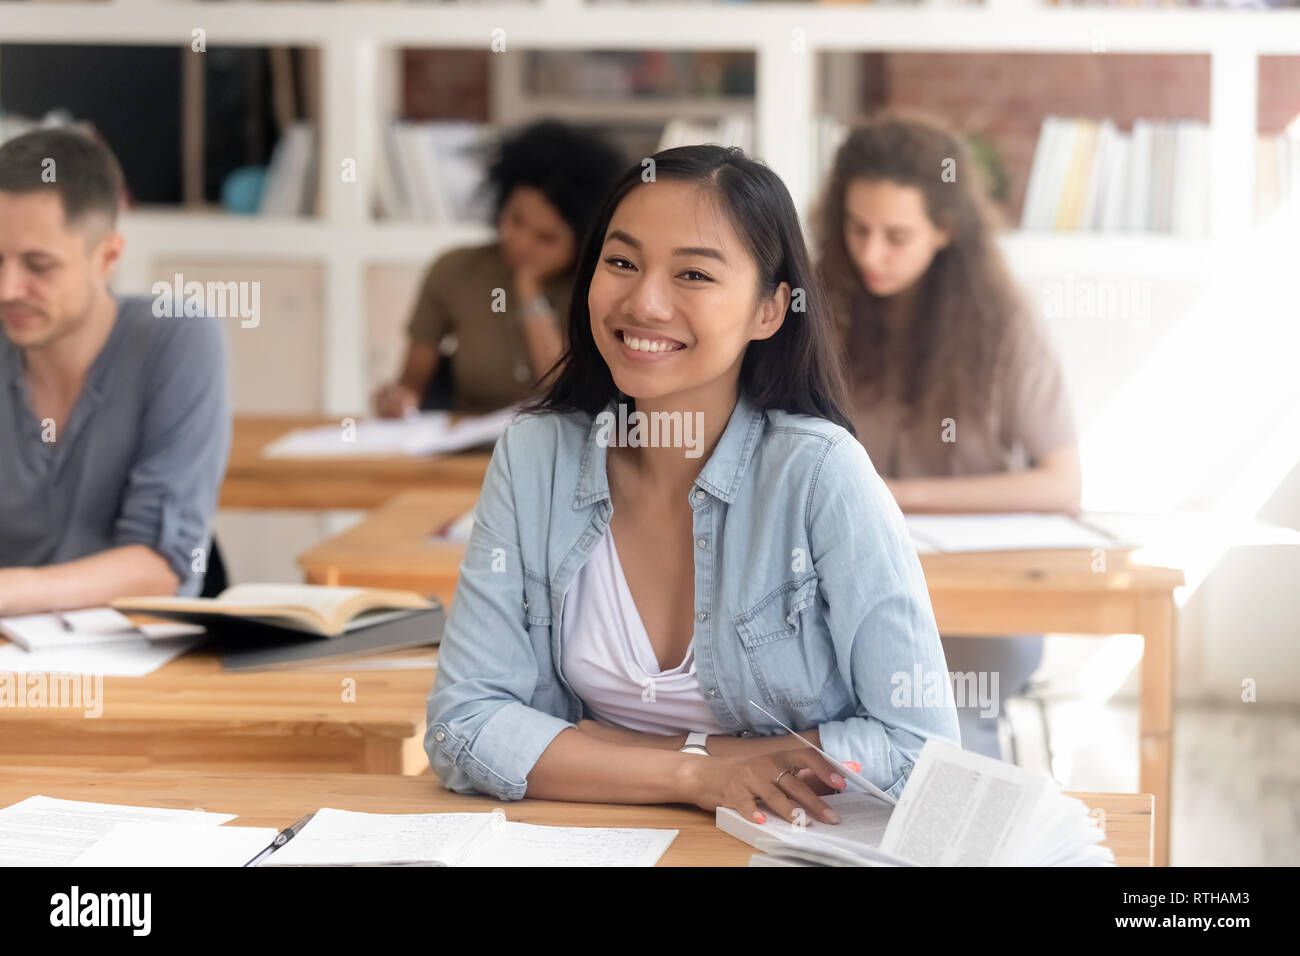 Smiling smart asian student looking at camera sitting at desk Banque D'Images